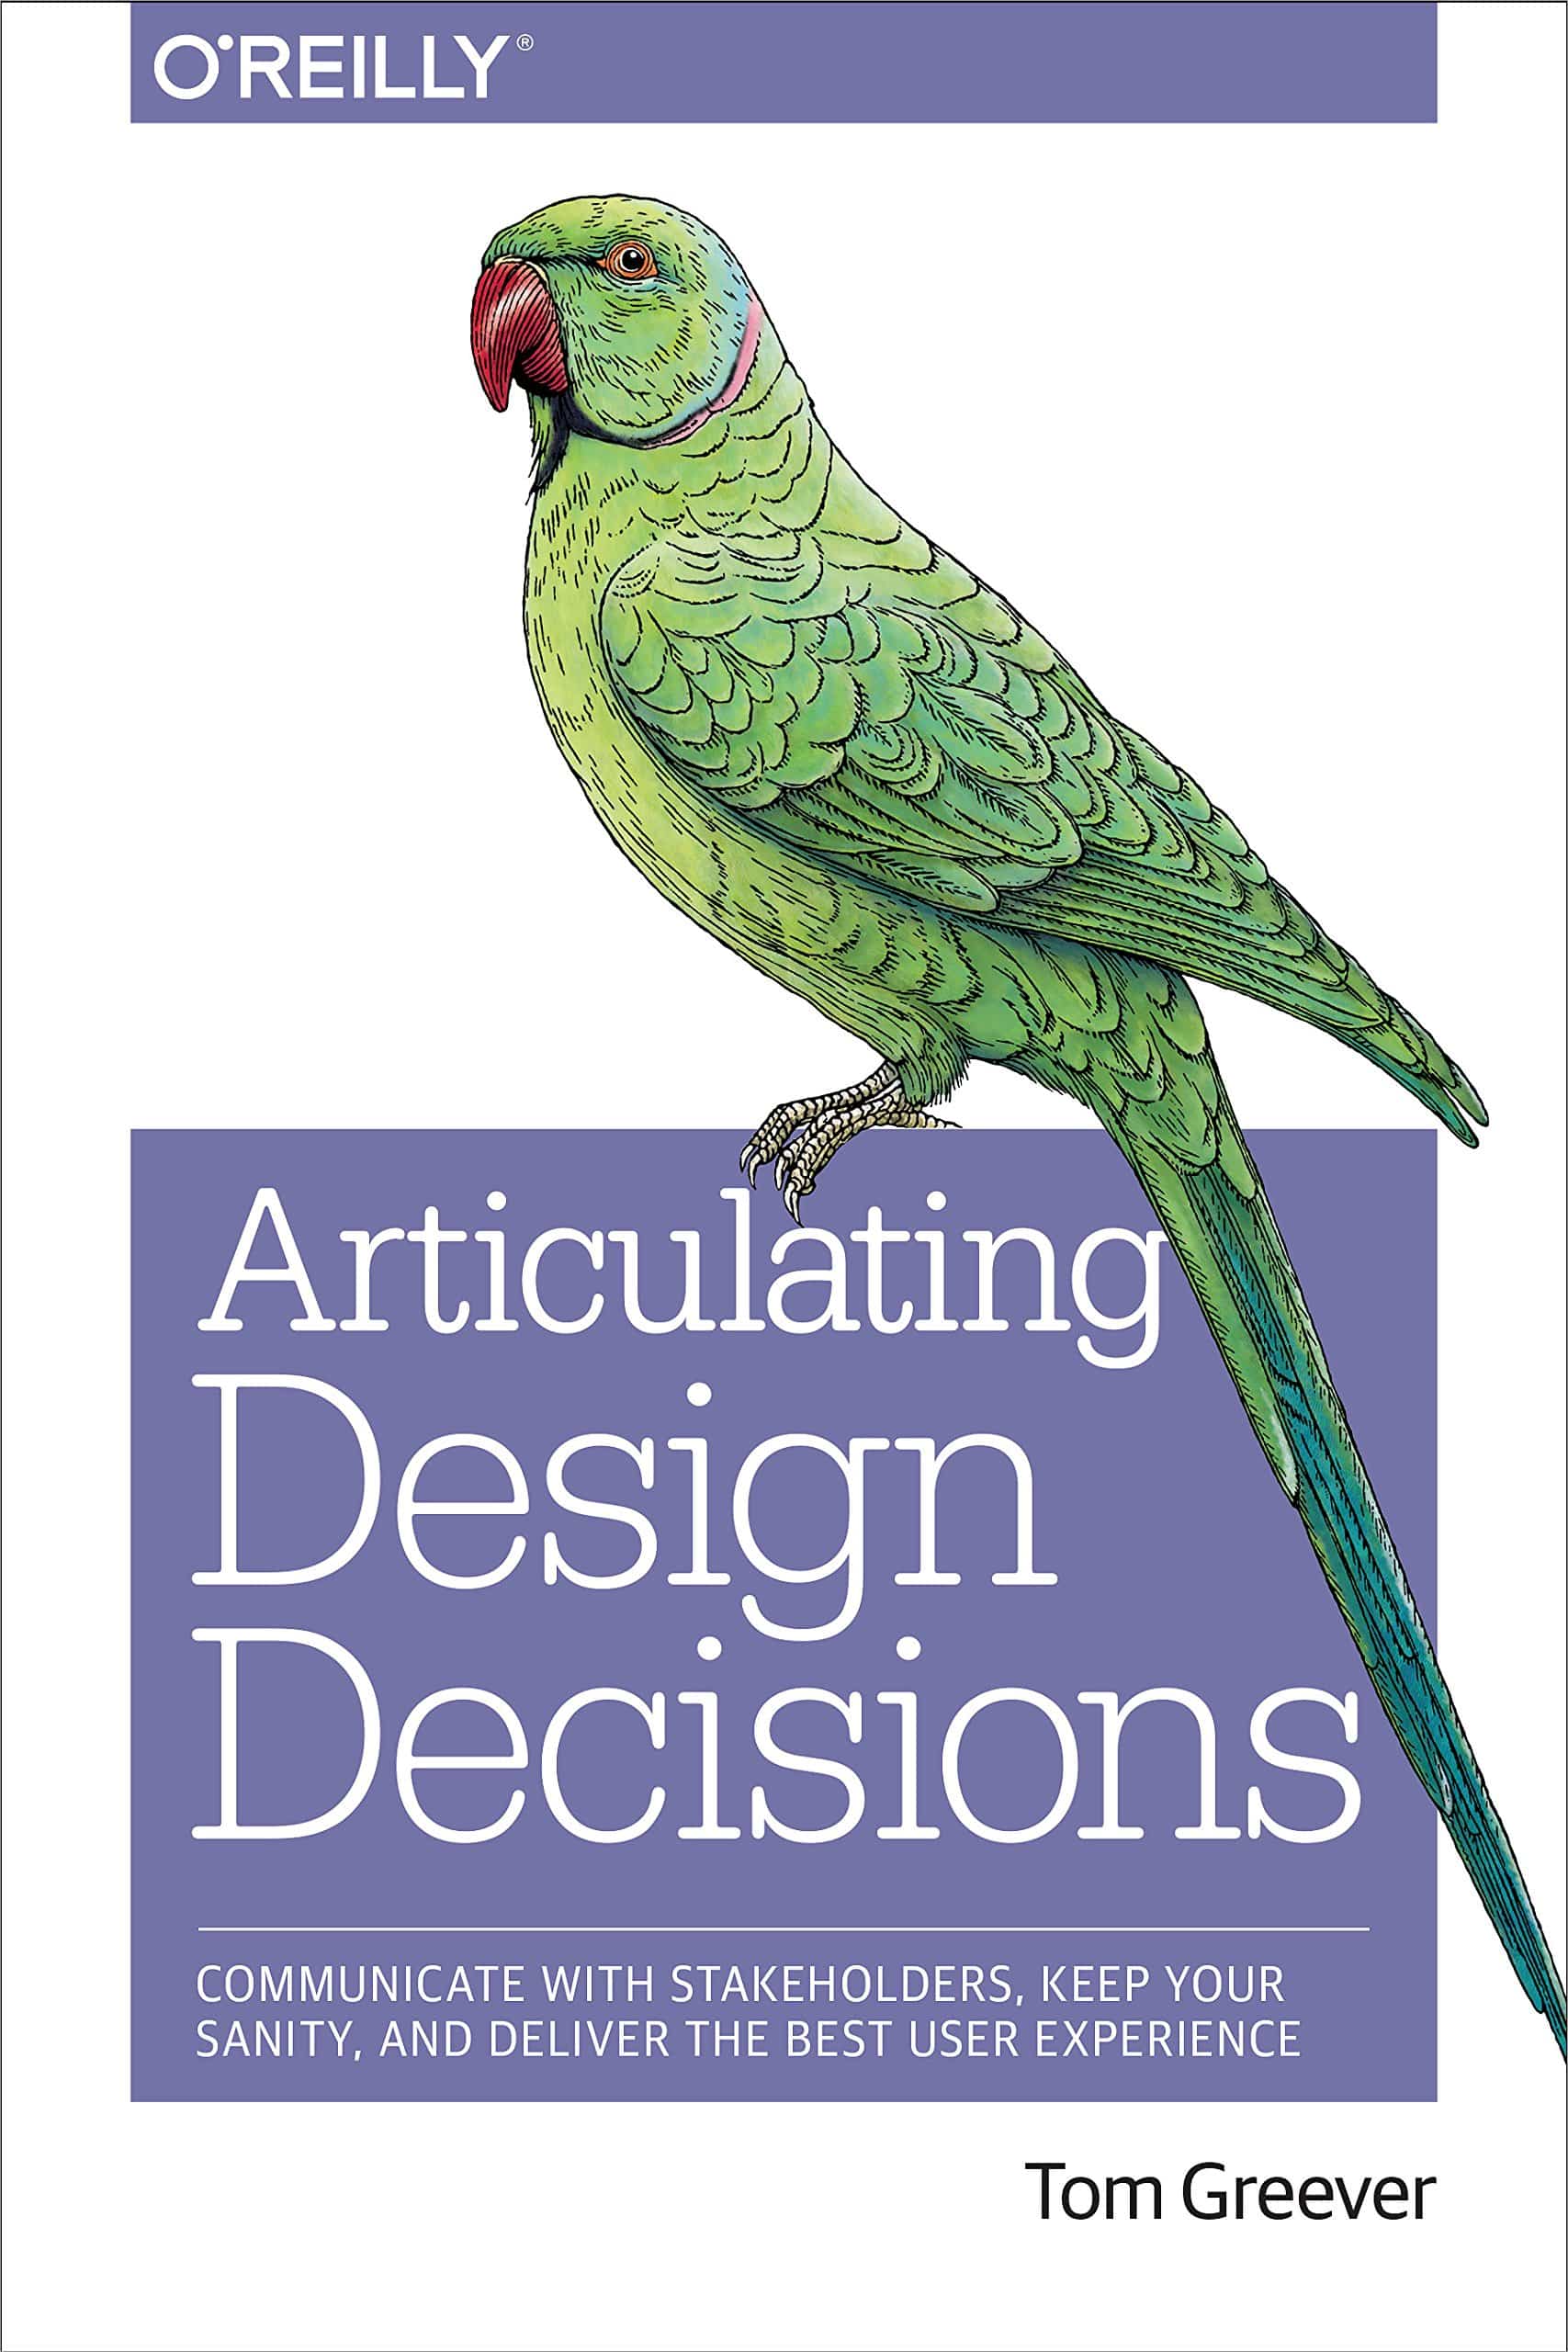 The cover of Articulating Design Decisions